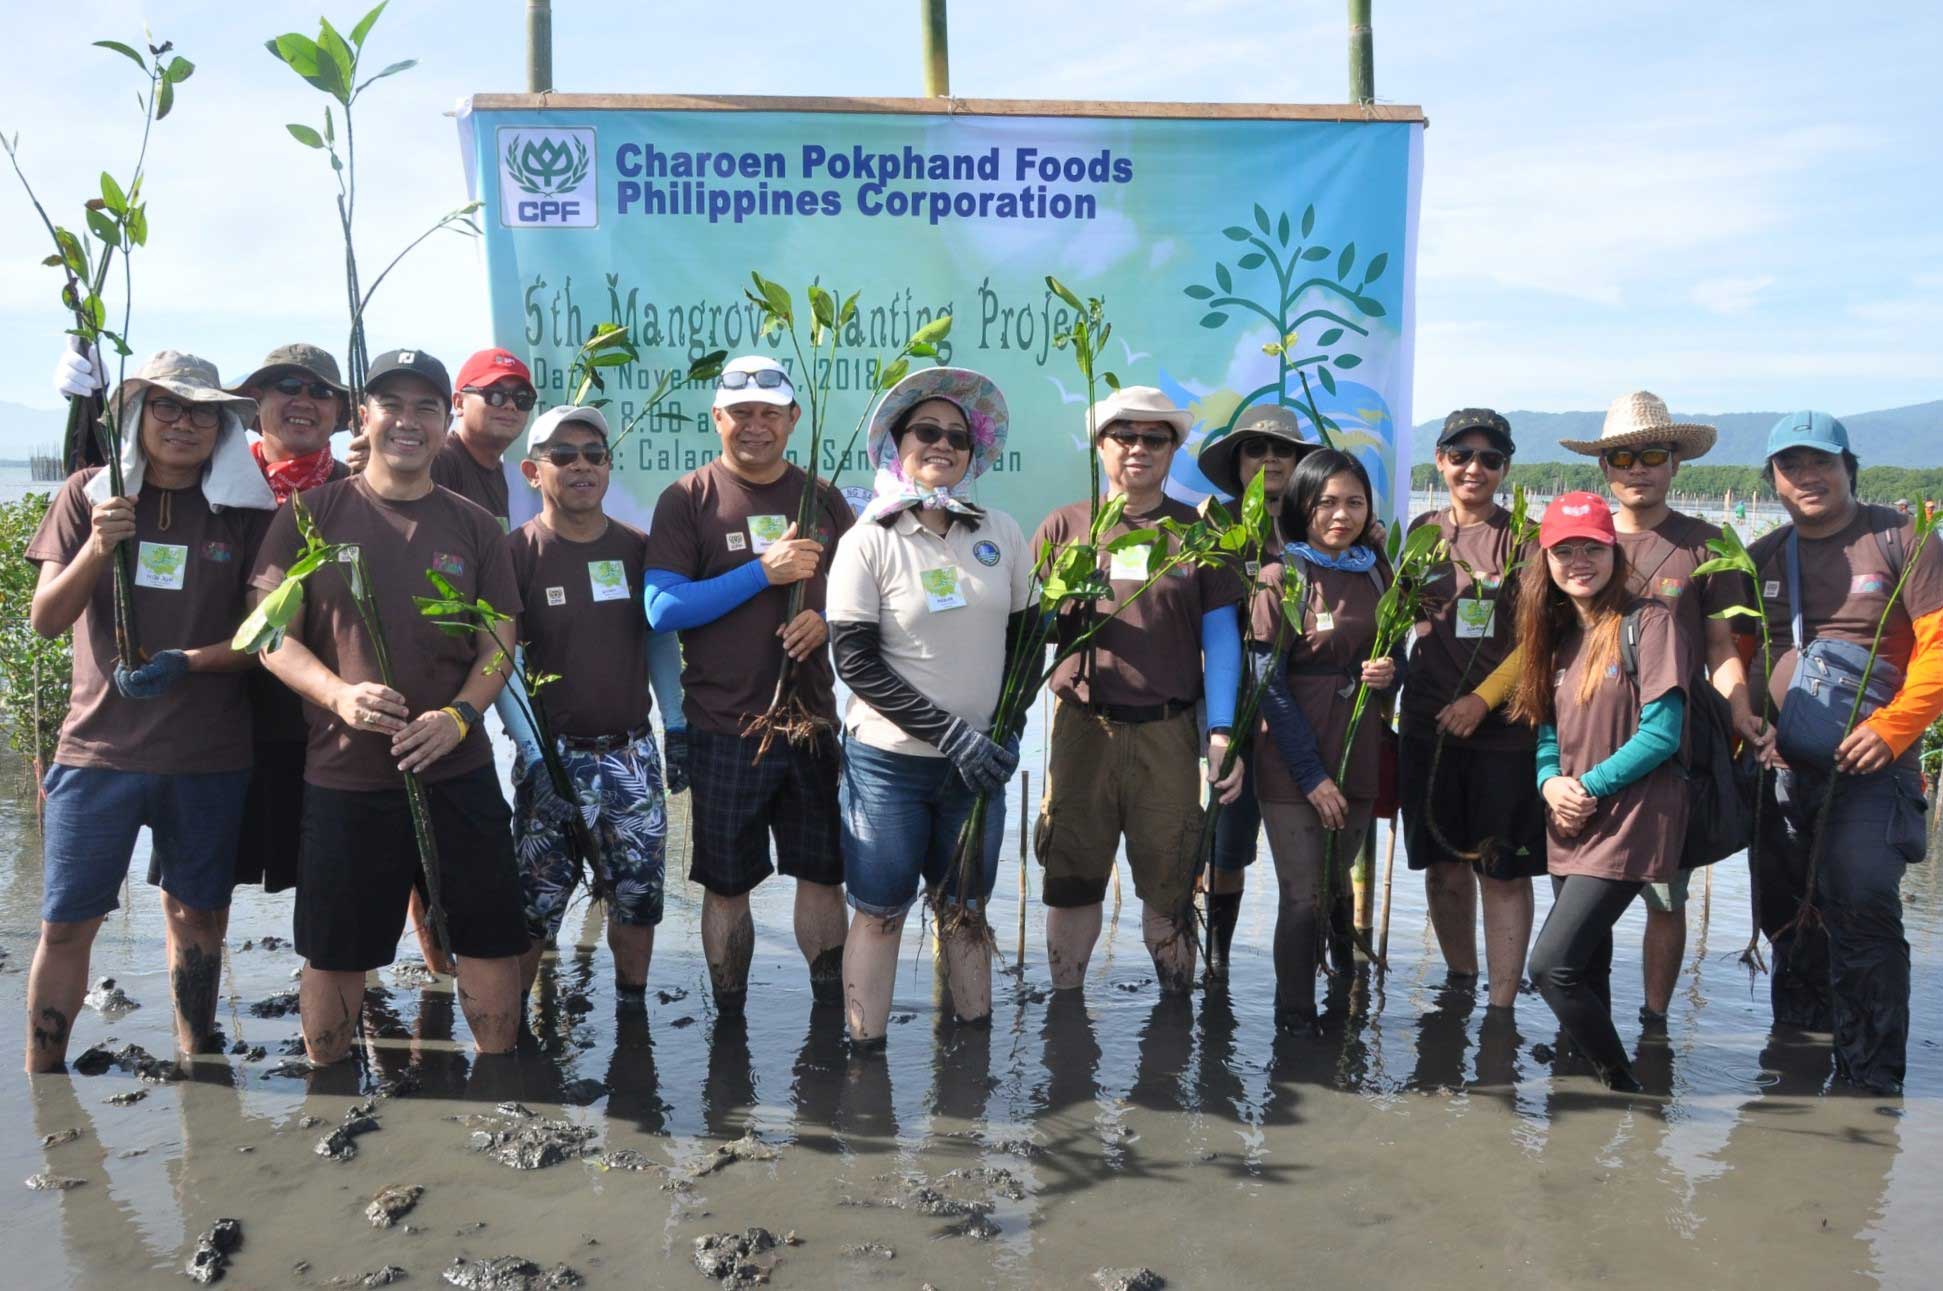 CP Foods and communities protect Philippines’ coastal area with mangrove plants